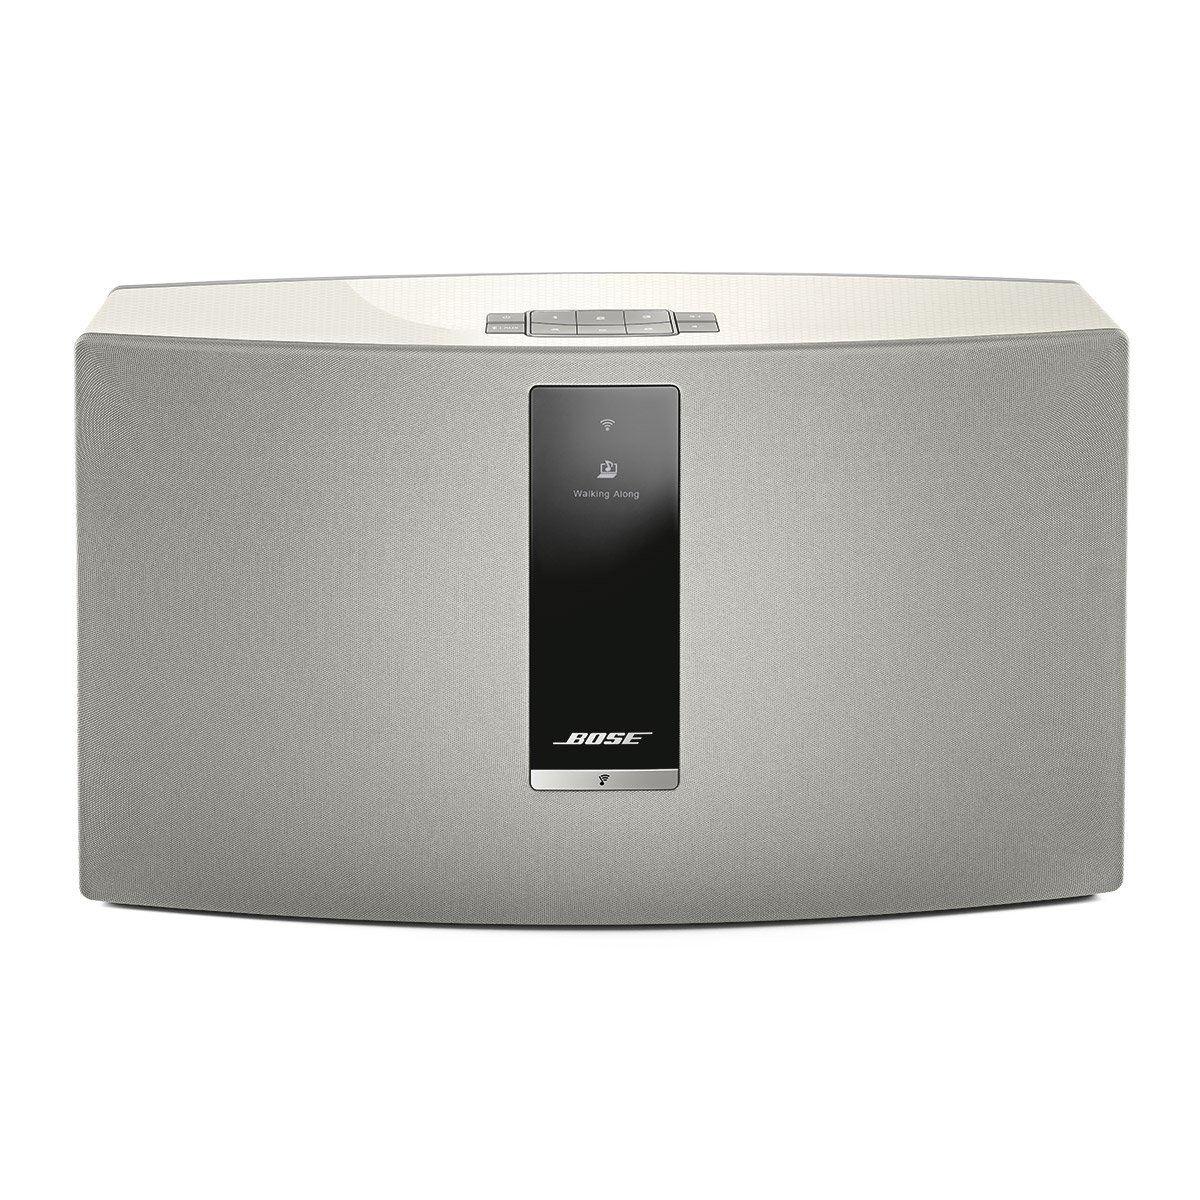 Open the SoundTouch app and select your speaker from the Devices list.
Go to the "Settings" menu and choose "Wi-Fi" to reconnect the speaker to your network.